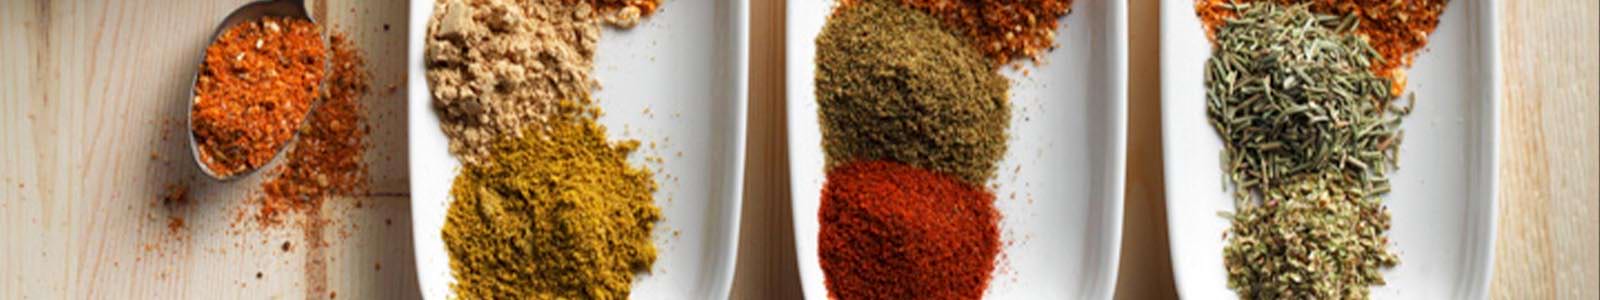 Curry paste - buy best curry paste from the health food store in the USA - Alive Herbals